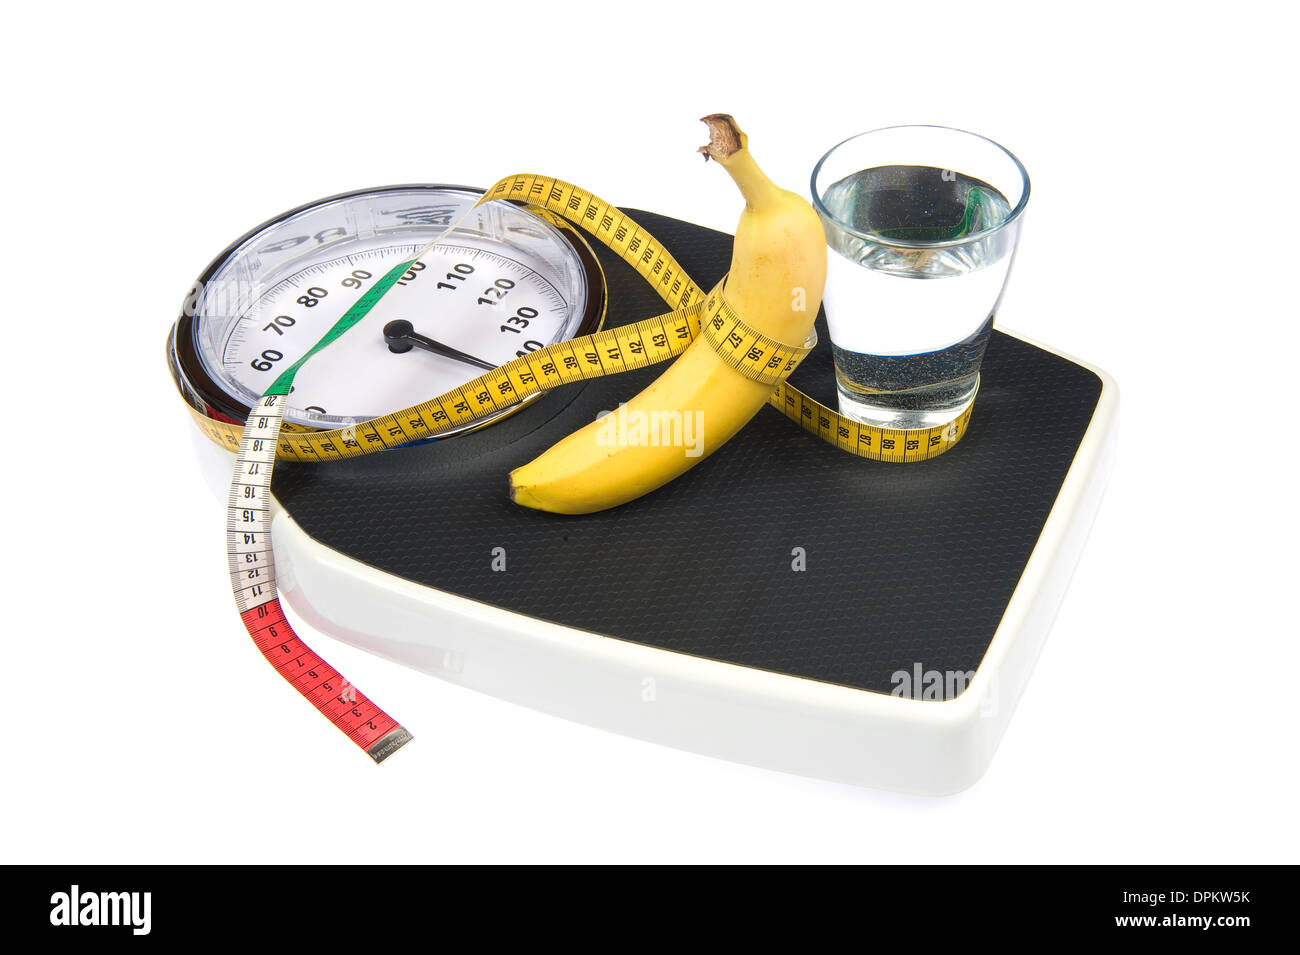 A weight scale with measuring tape, a banana and a glass of water Stock Photo